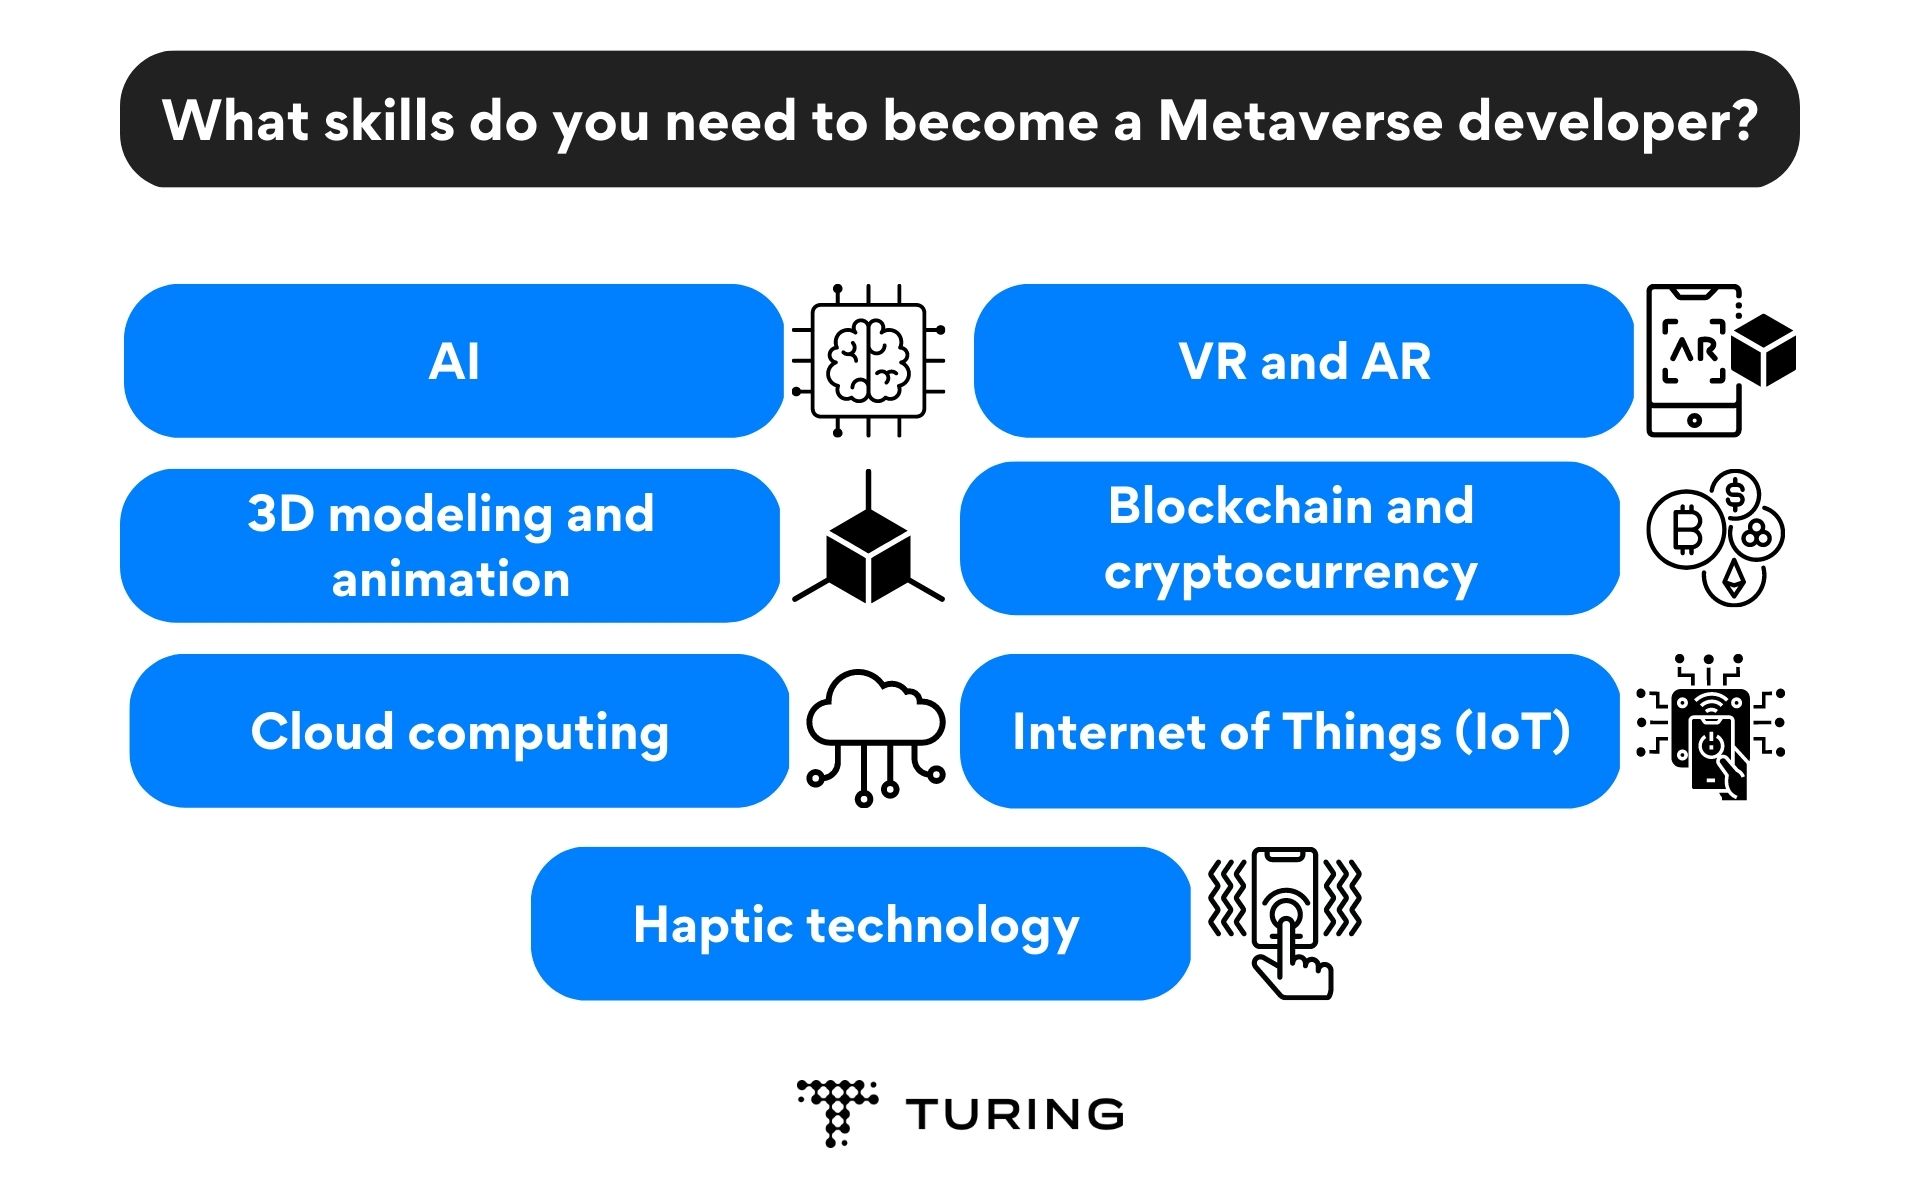 Skills needed to require a Metaverse developer